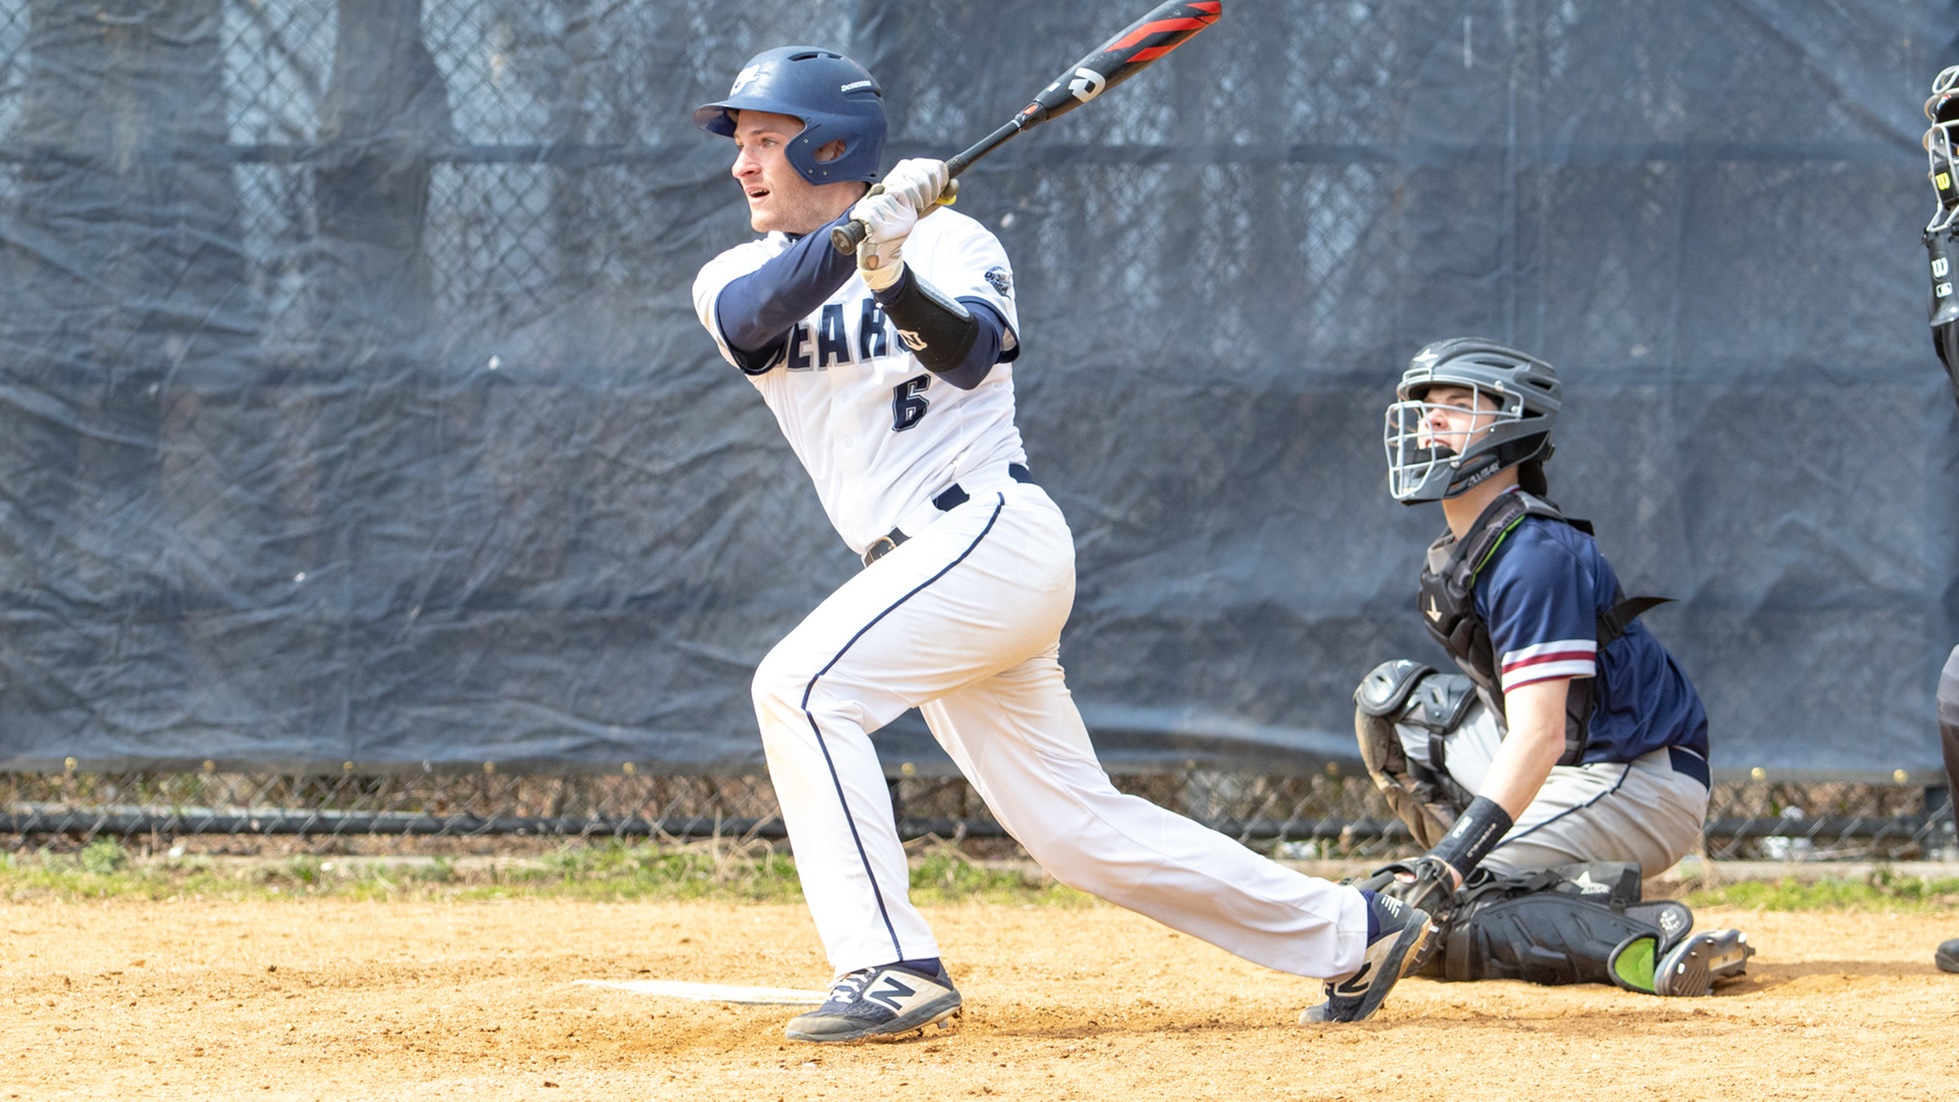 Watters Fires Complete Game, Palermo Adds Four Hits as Baseball Sweeps Staten Island